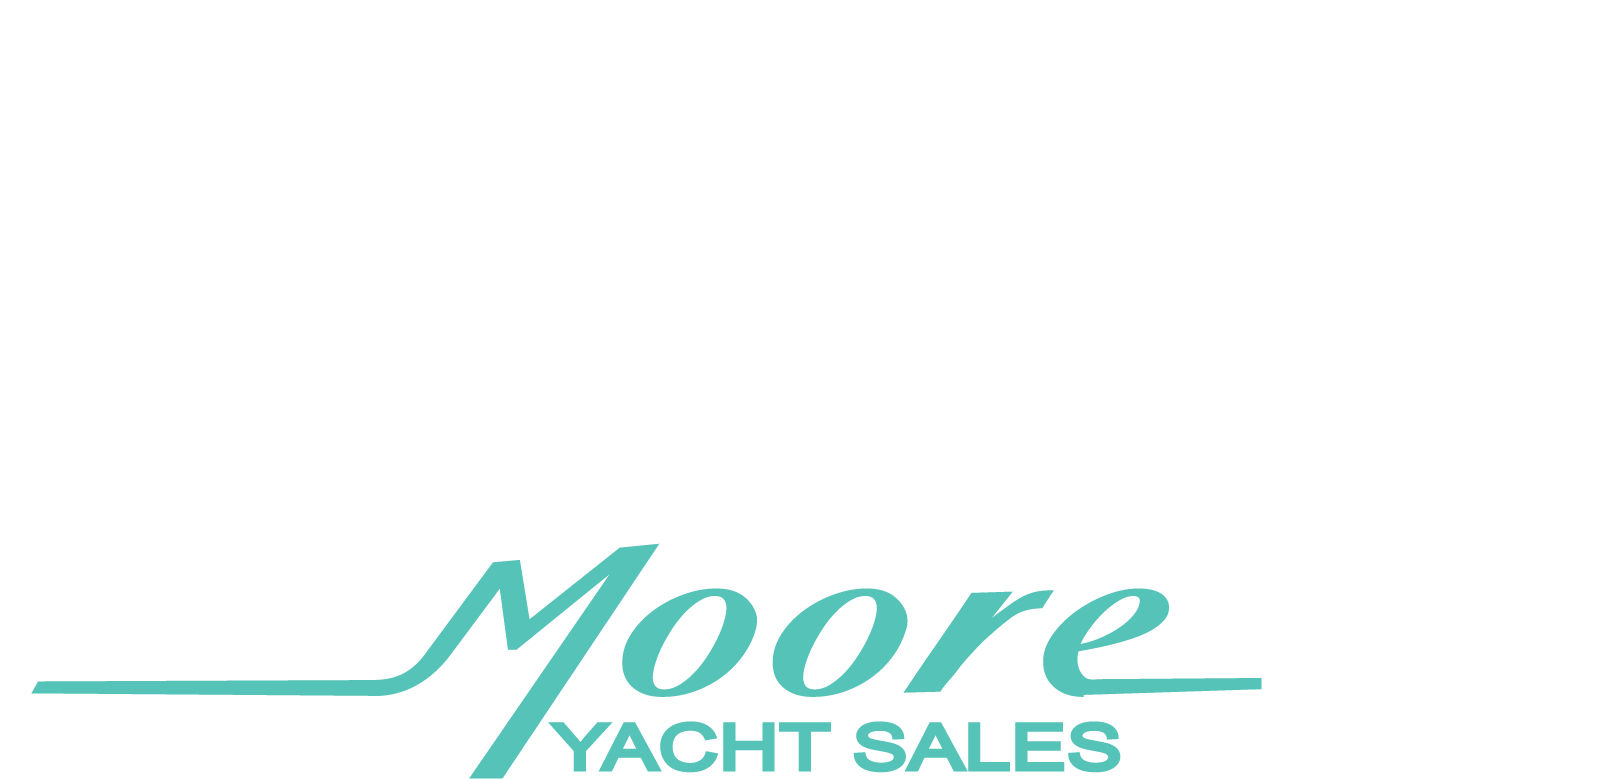 yacht for sale new england